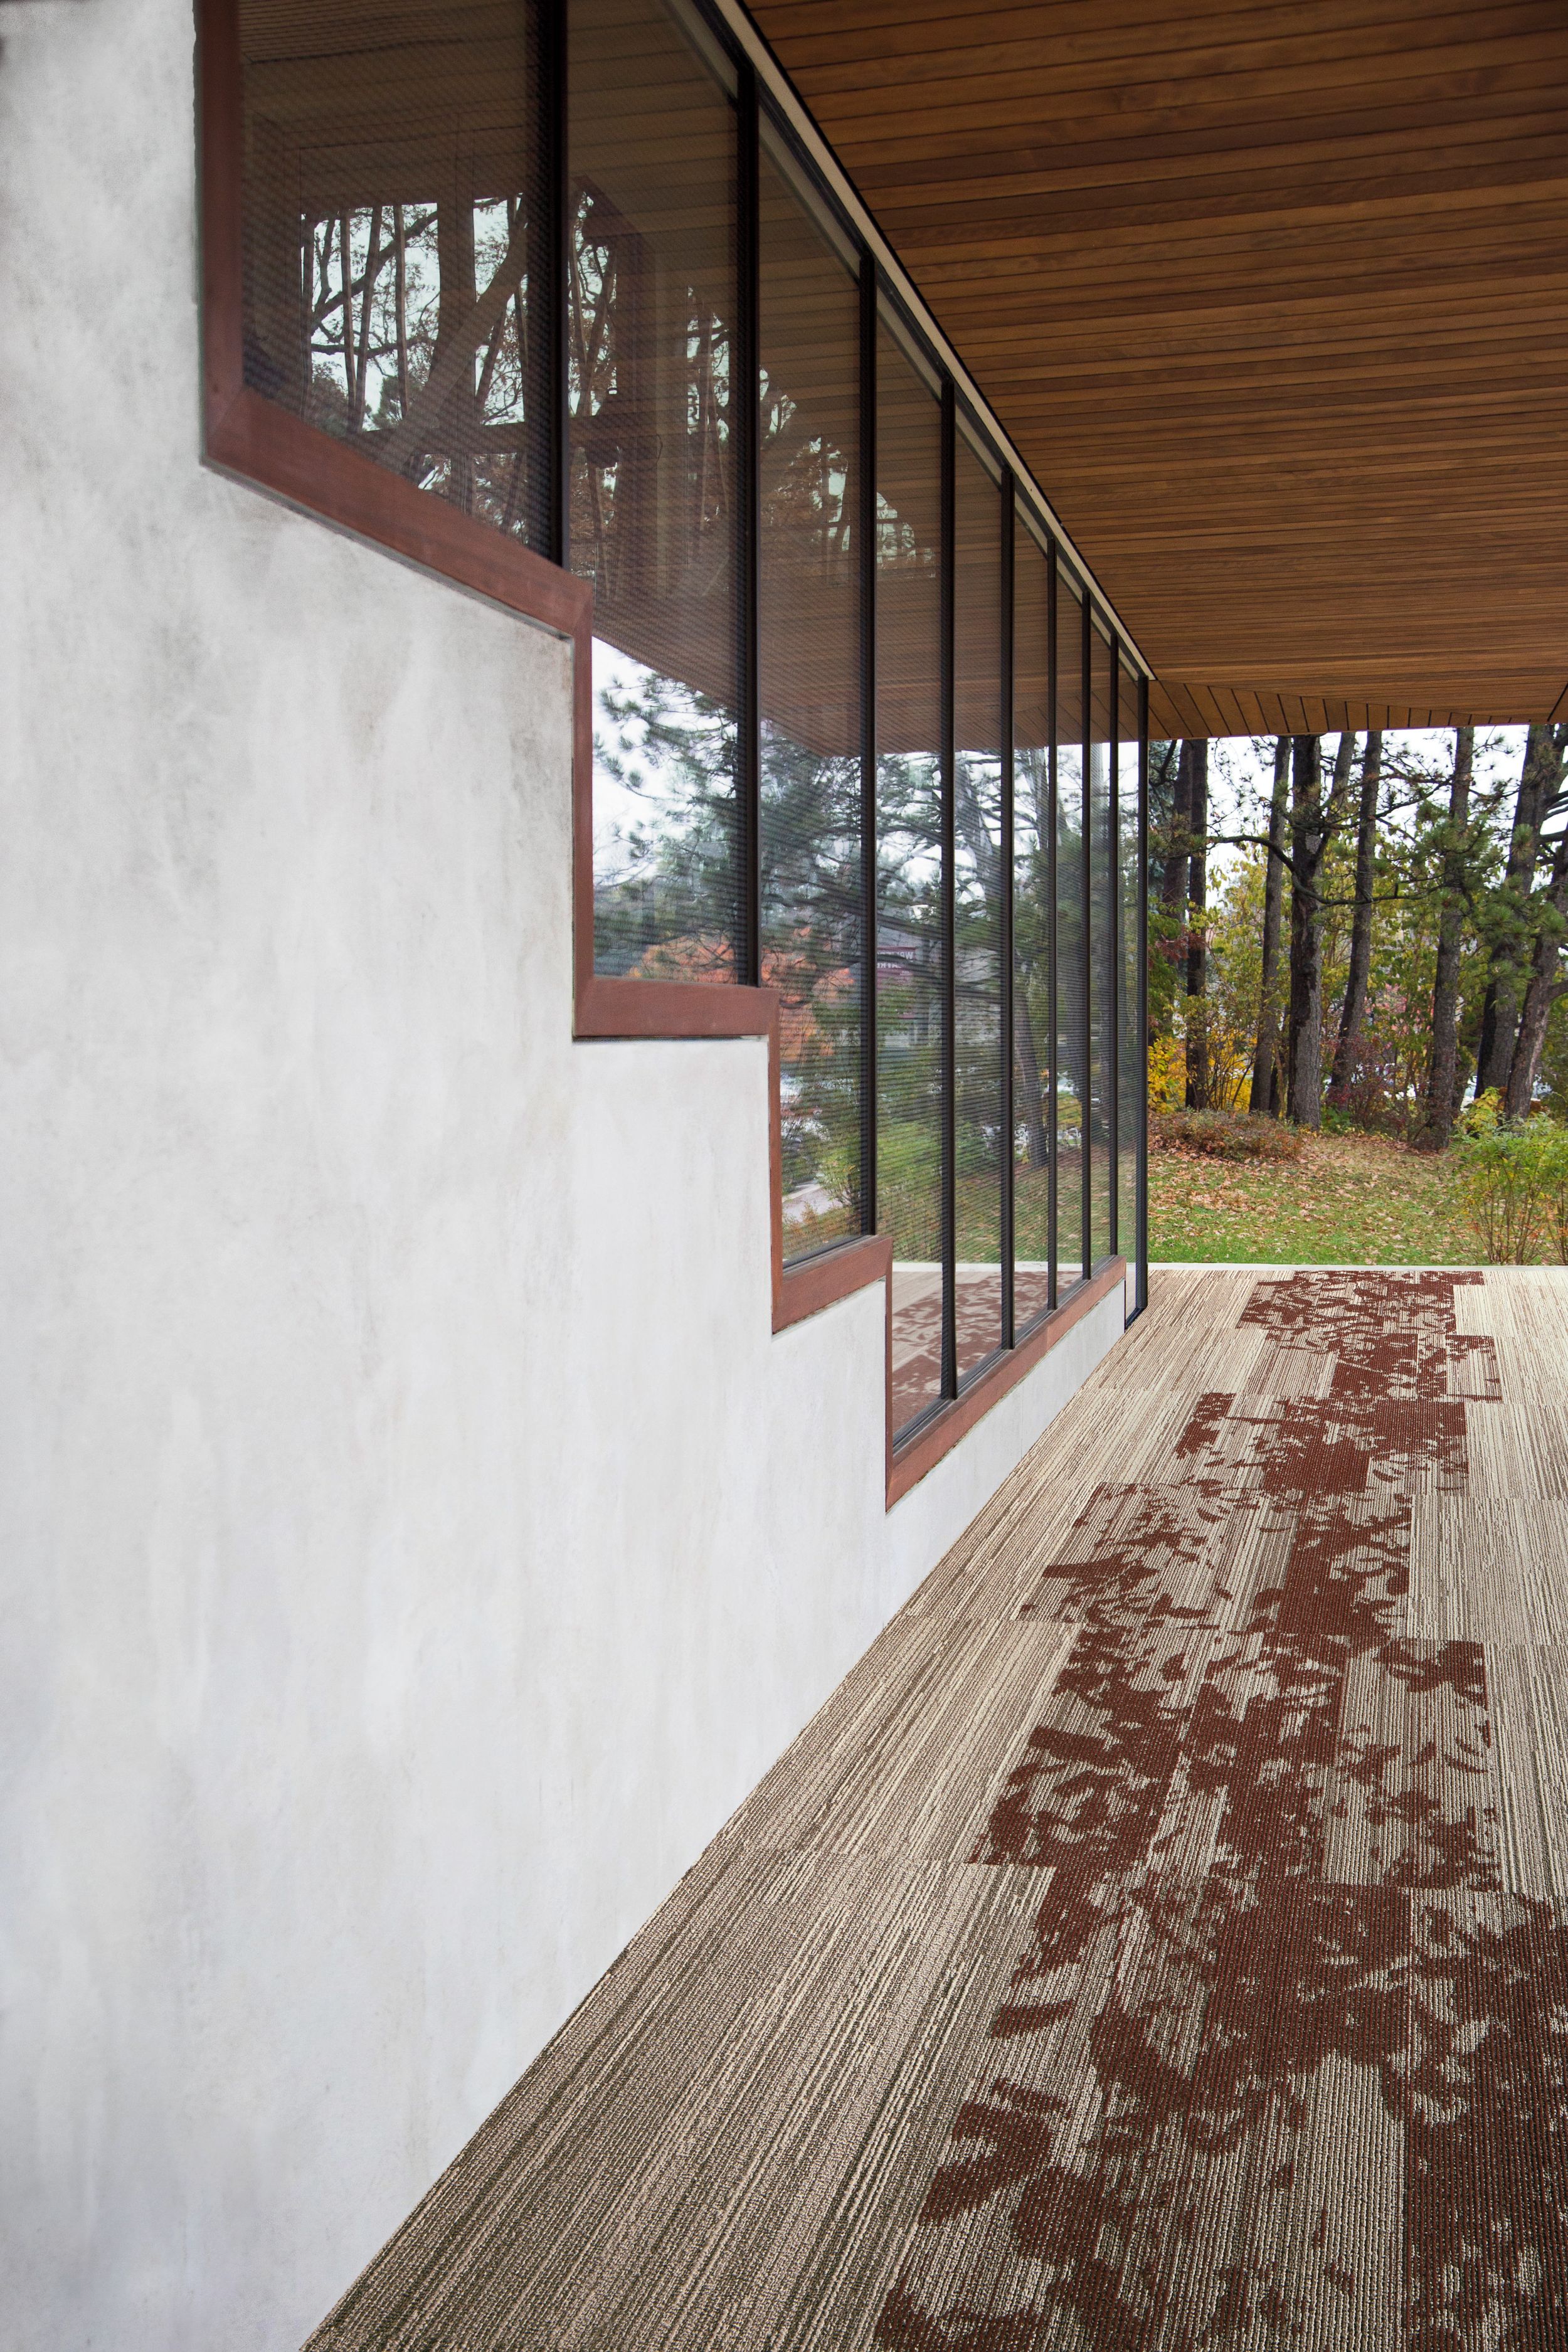 Interface Progression III and Glazing plank carpet tile shown for inspiration in outdoor setting image number 8